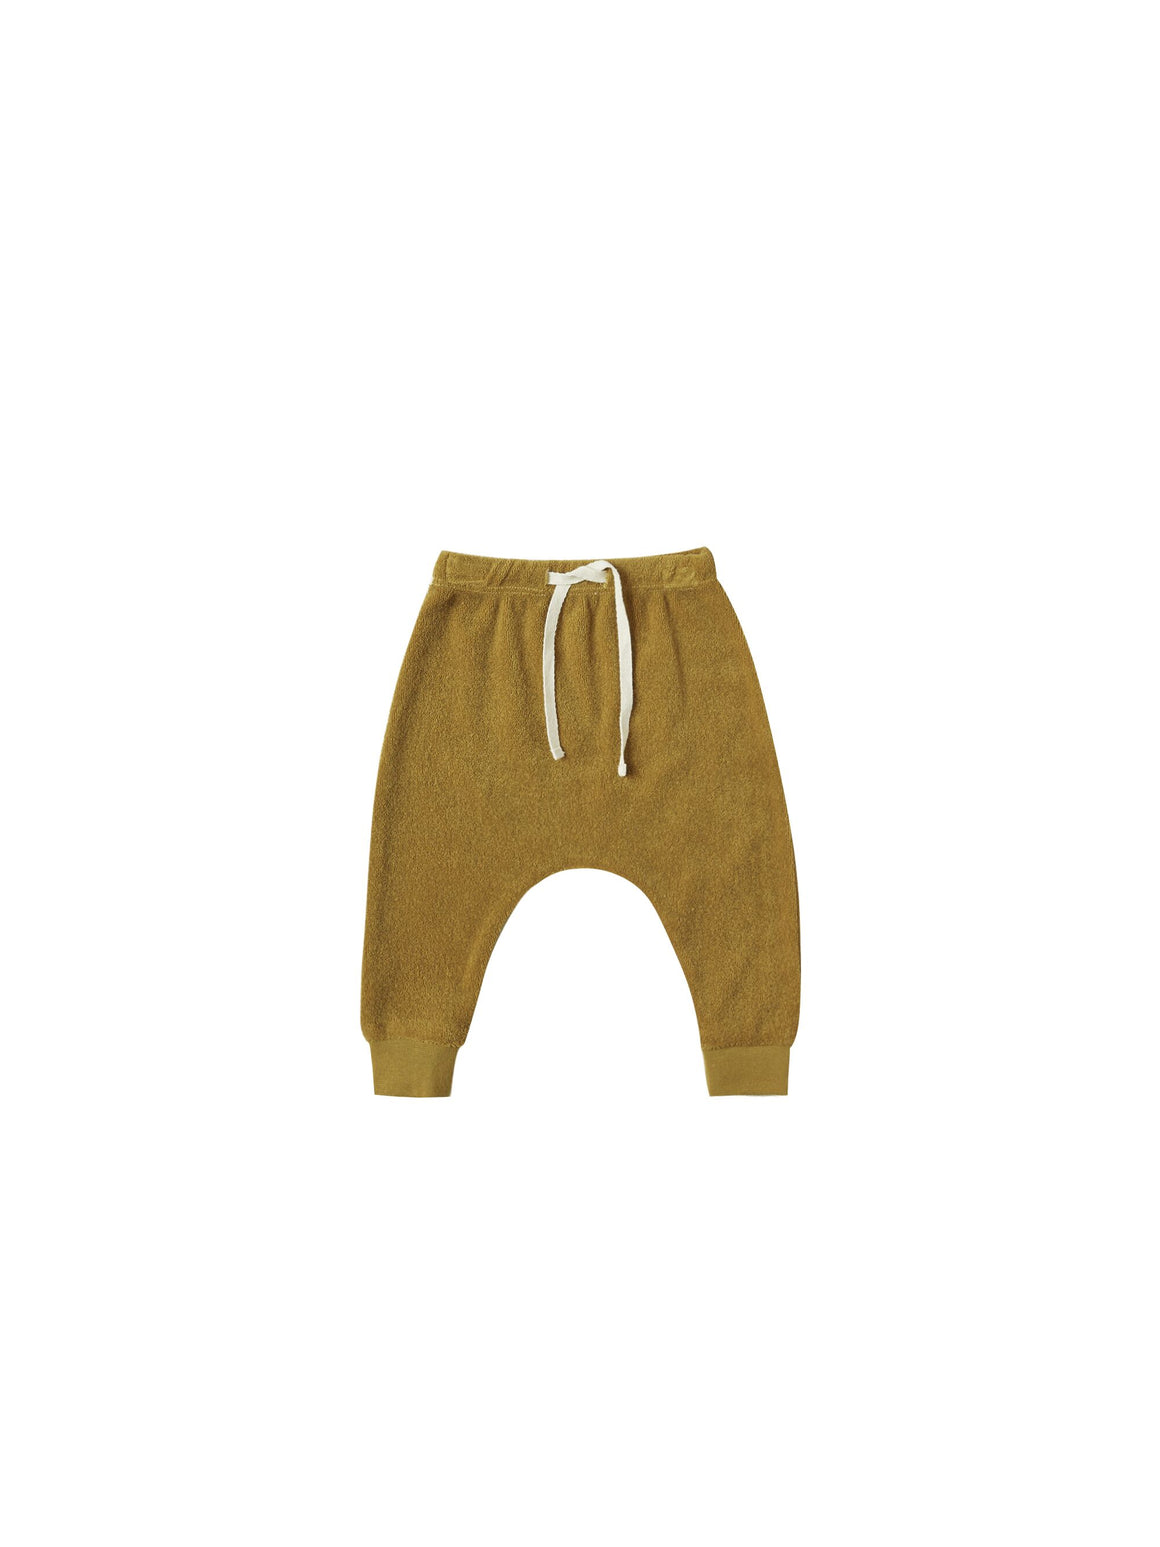 Terry Cloth Sweatpants - Ocre